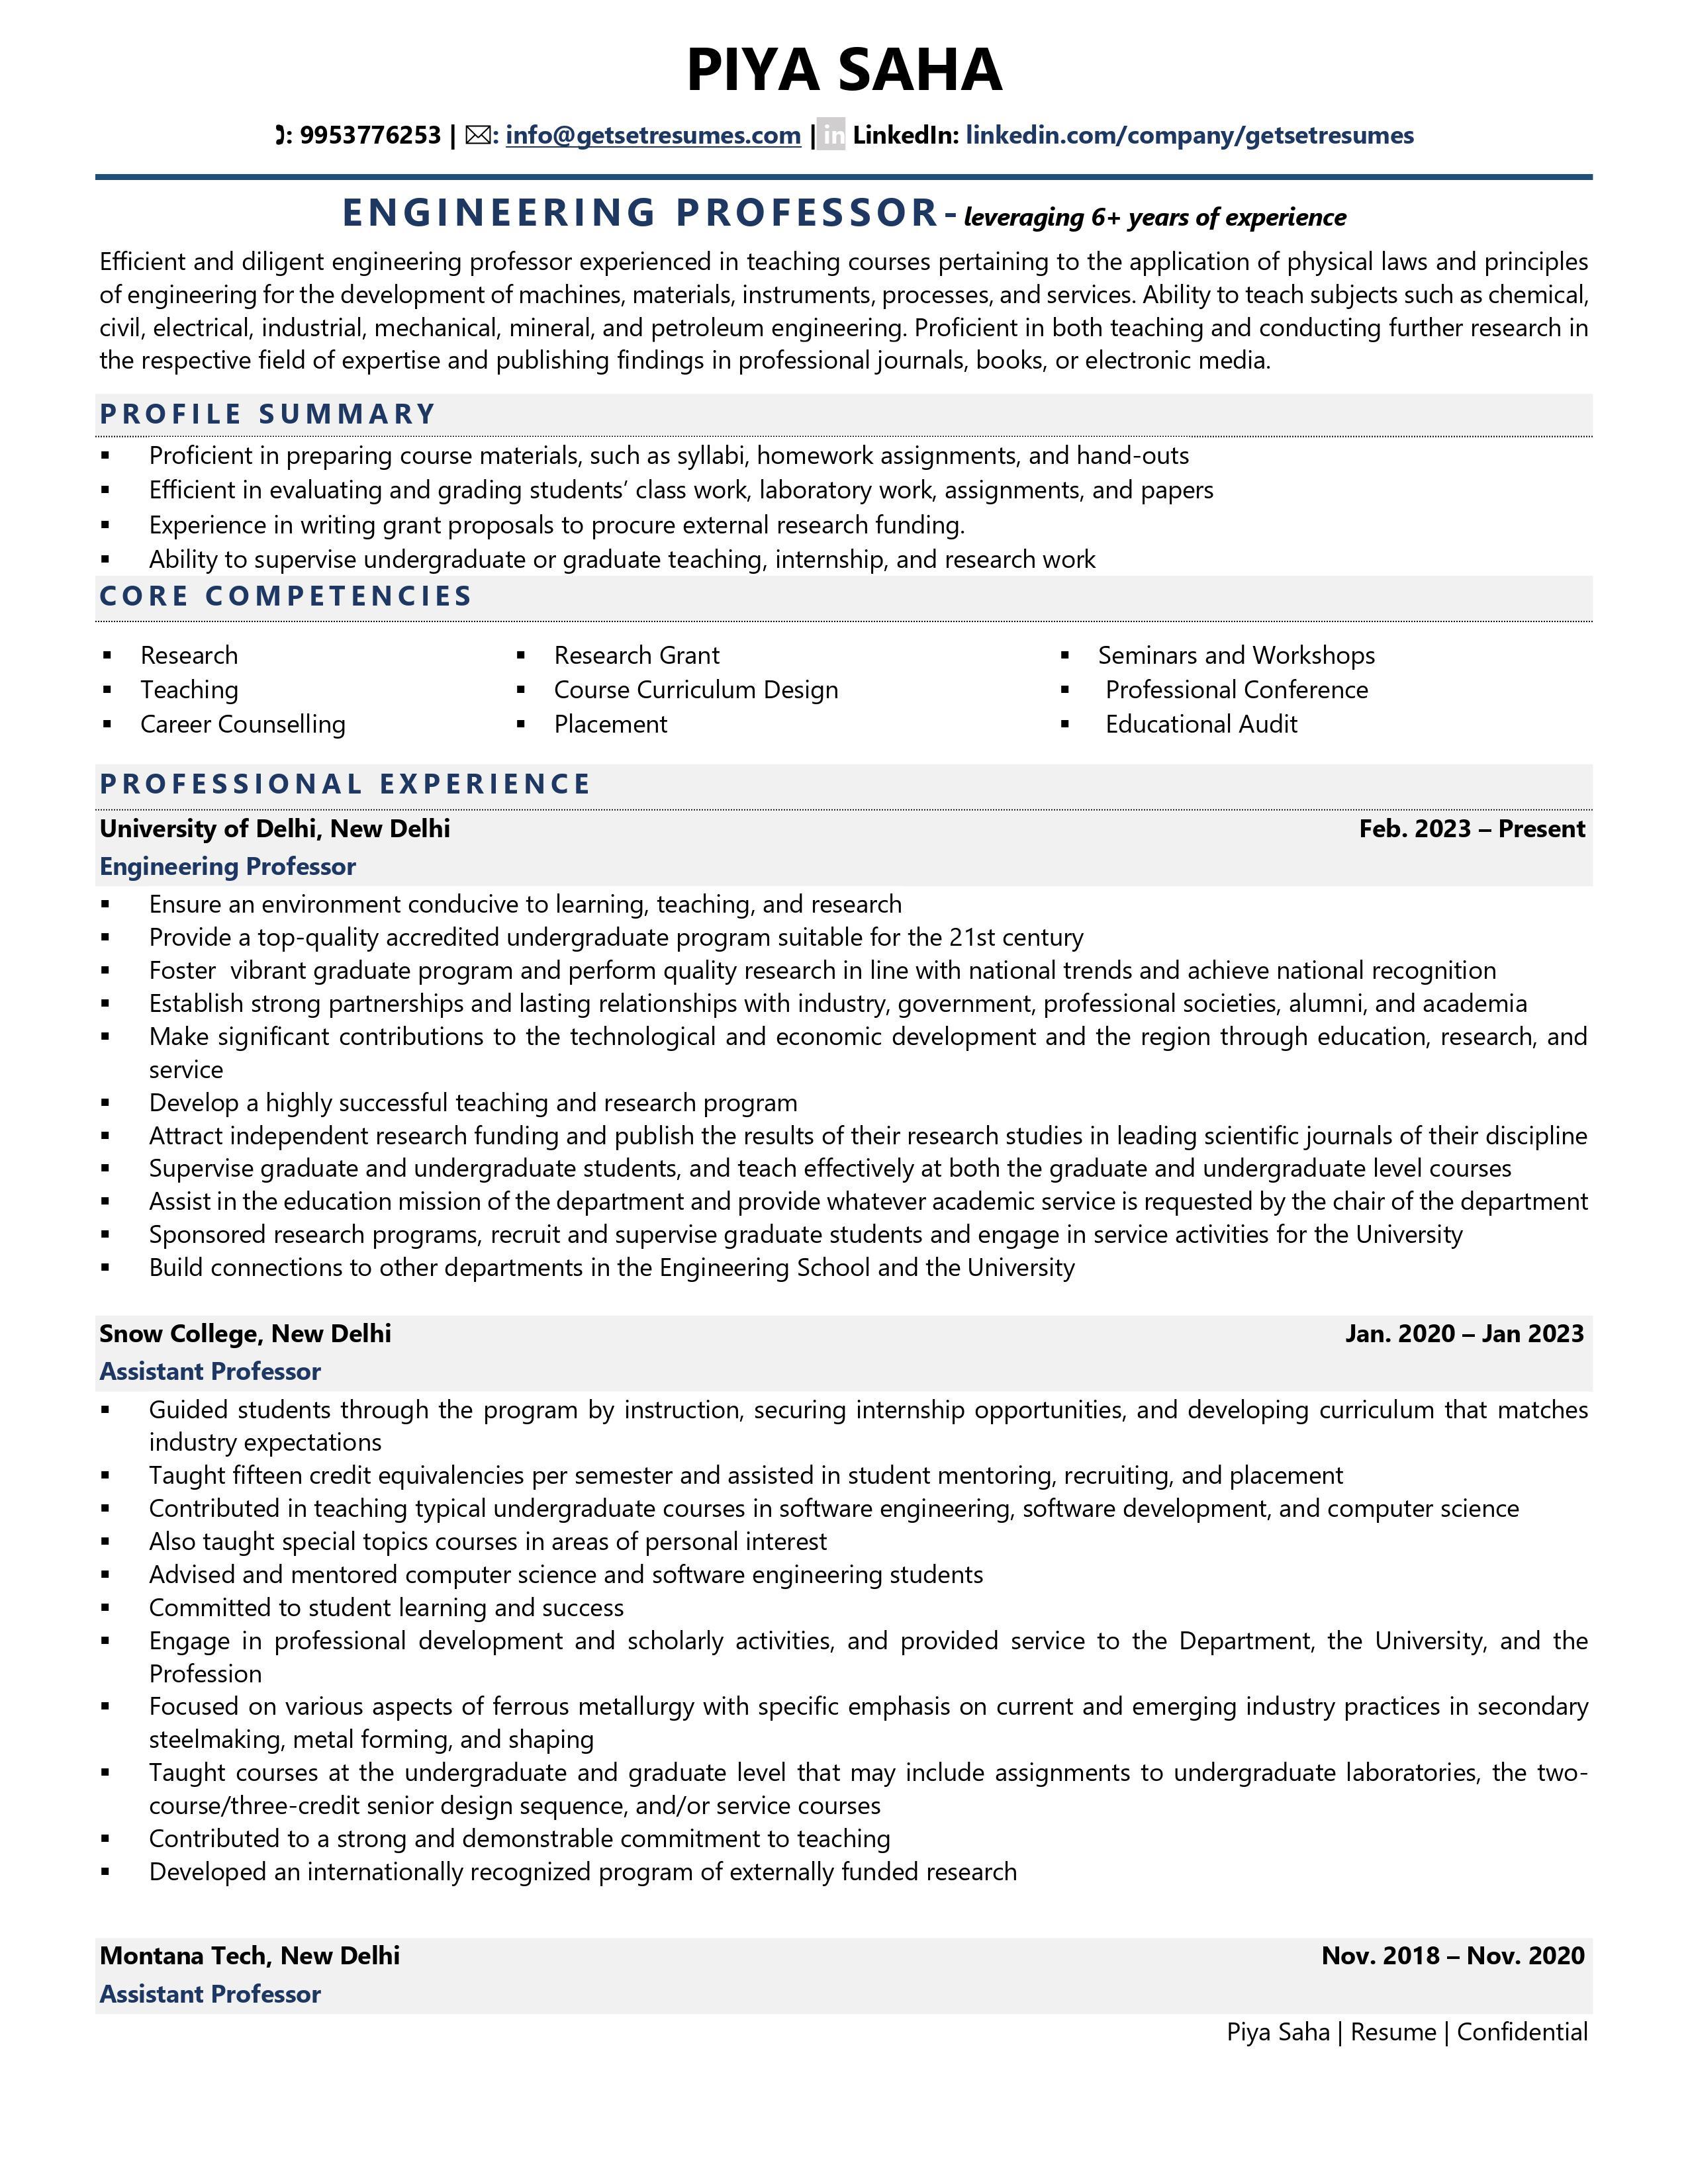 resume for college lecturer india